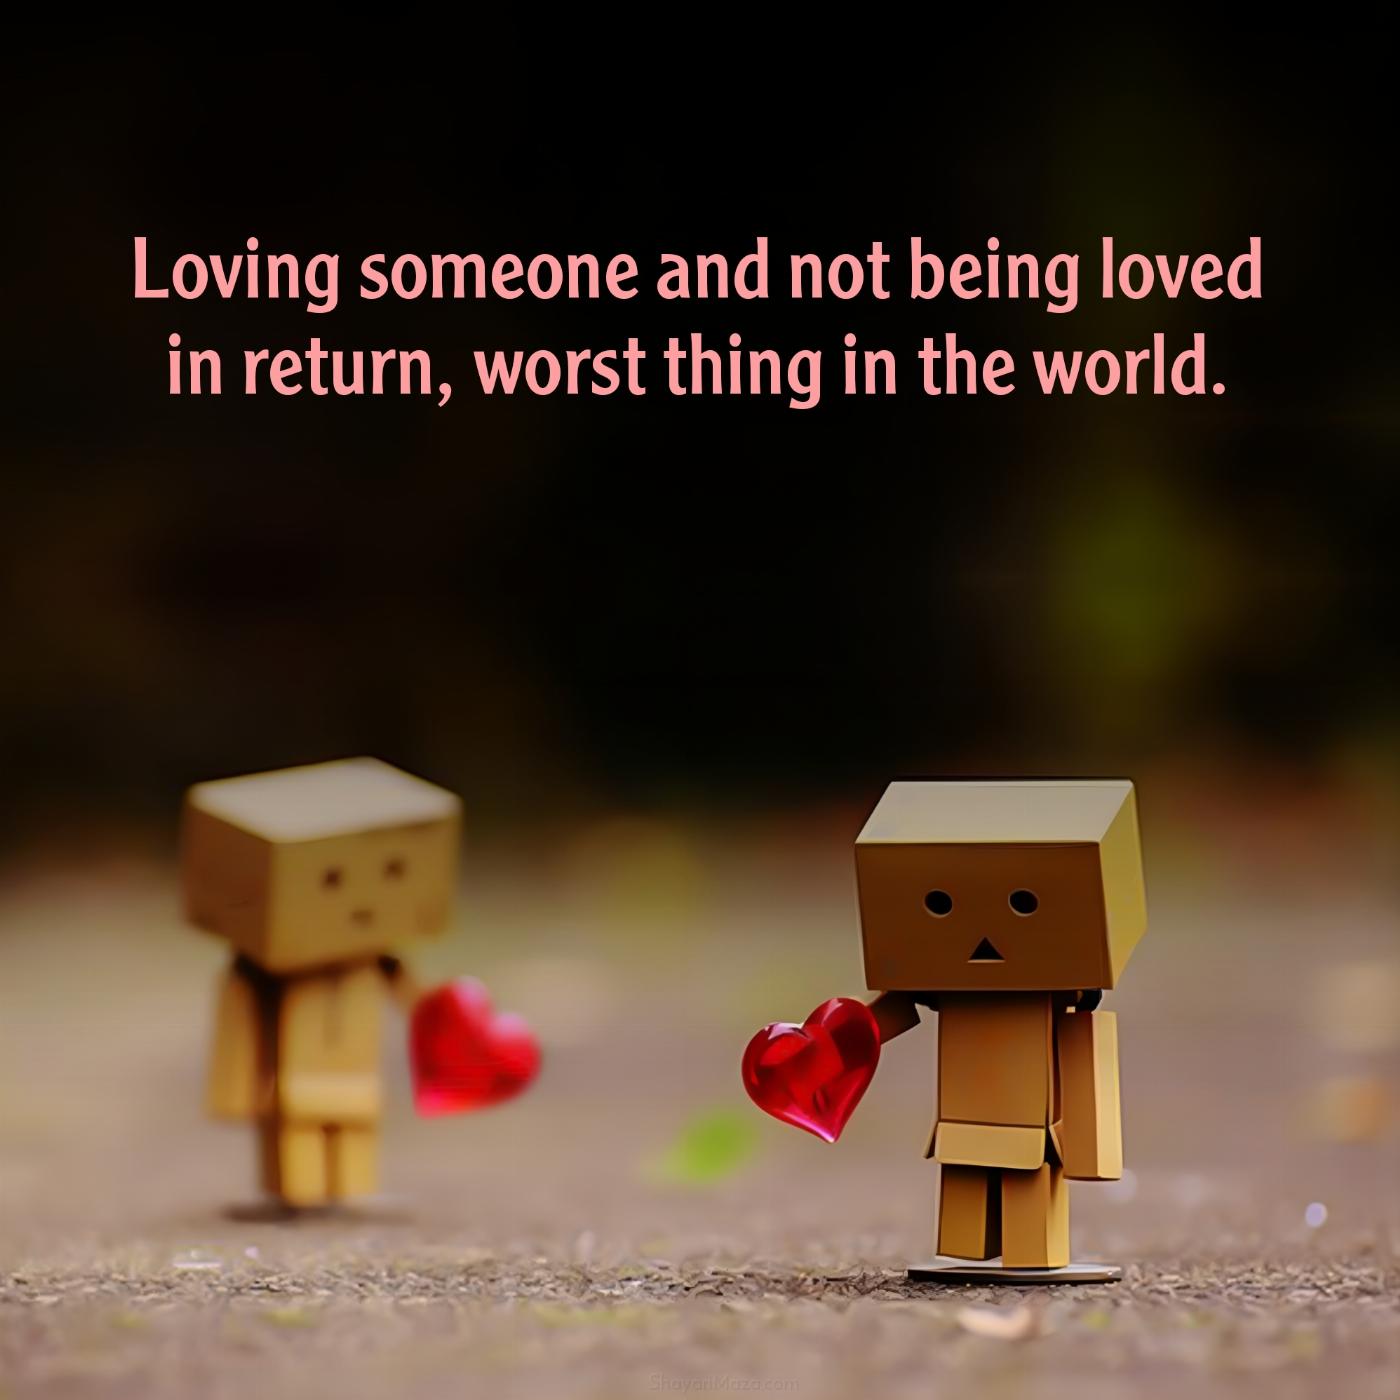 Loving someone and not being loved in return